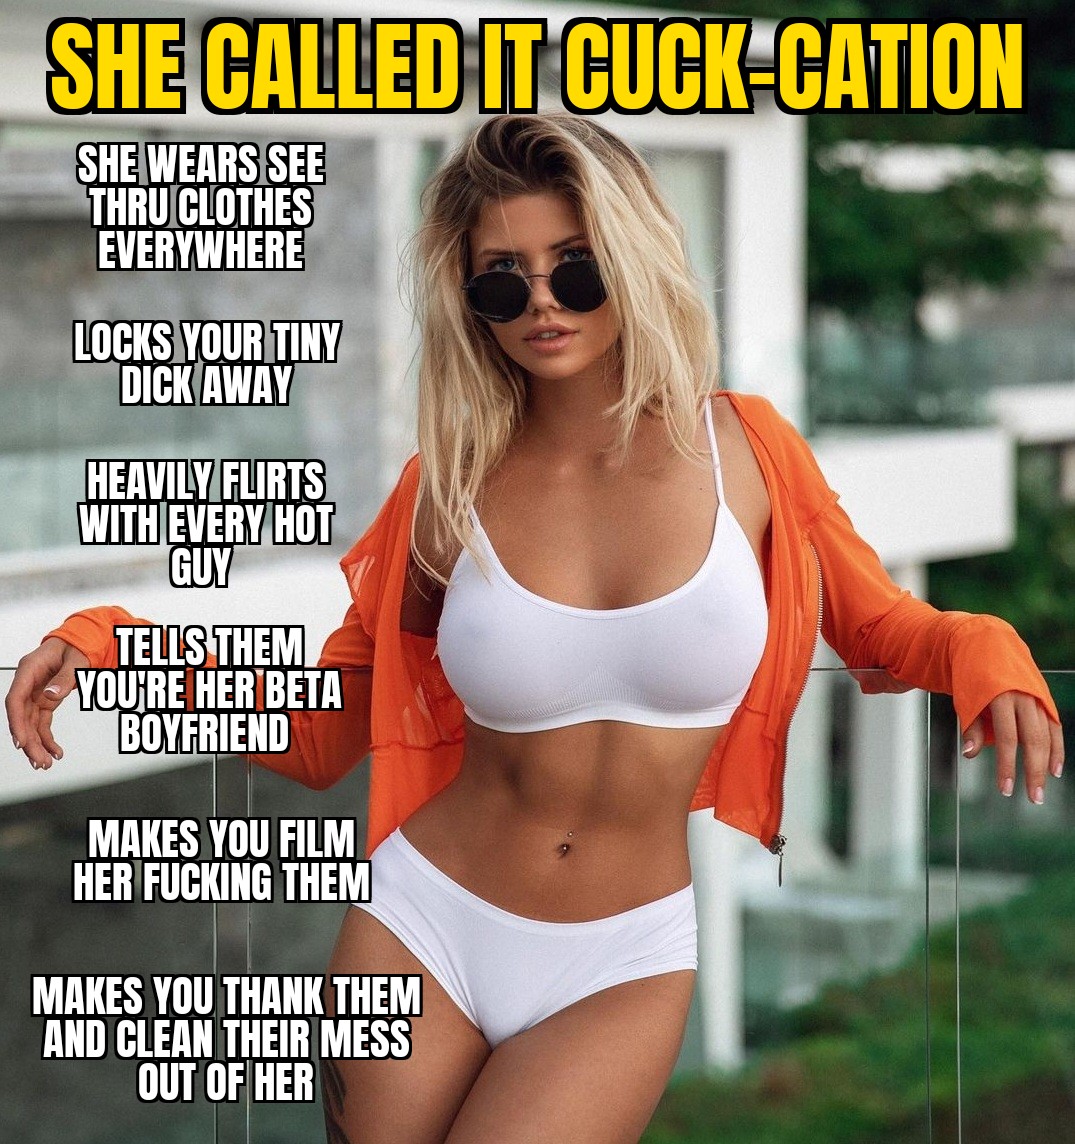 Hope youre ready for cuck-cation Foto